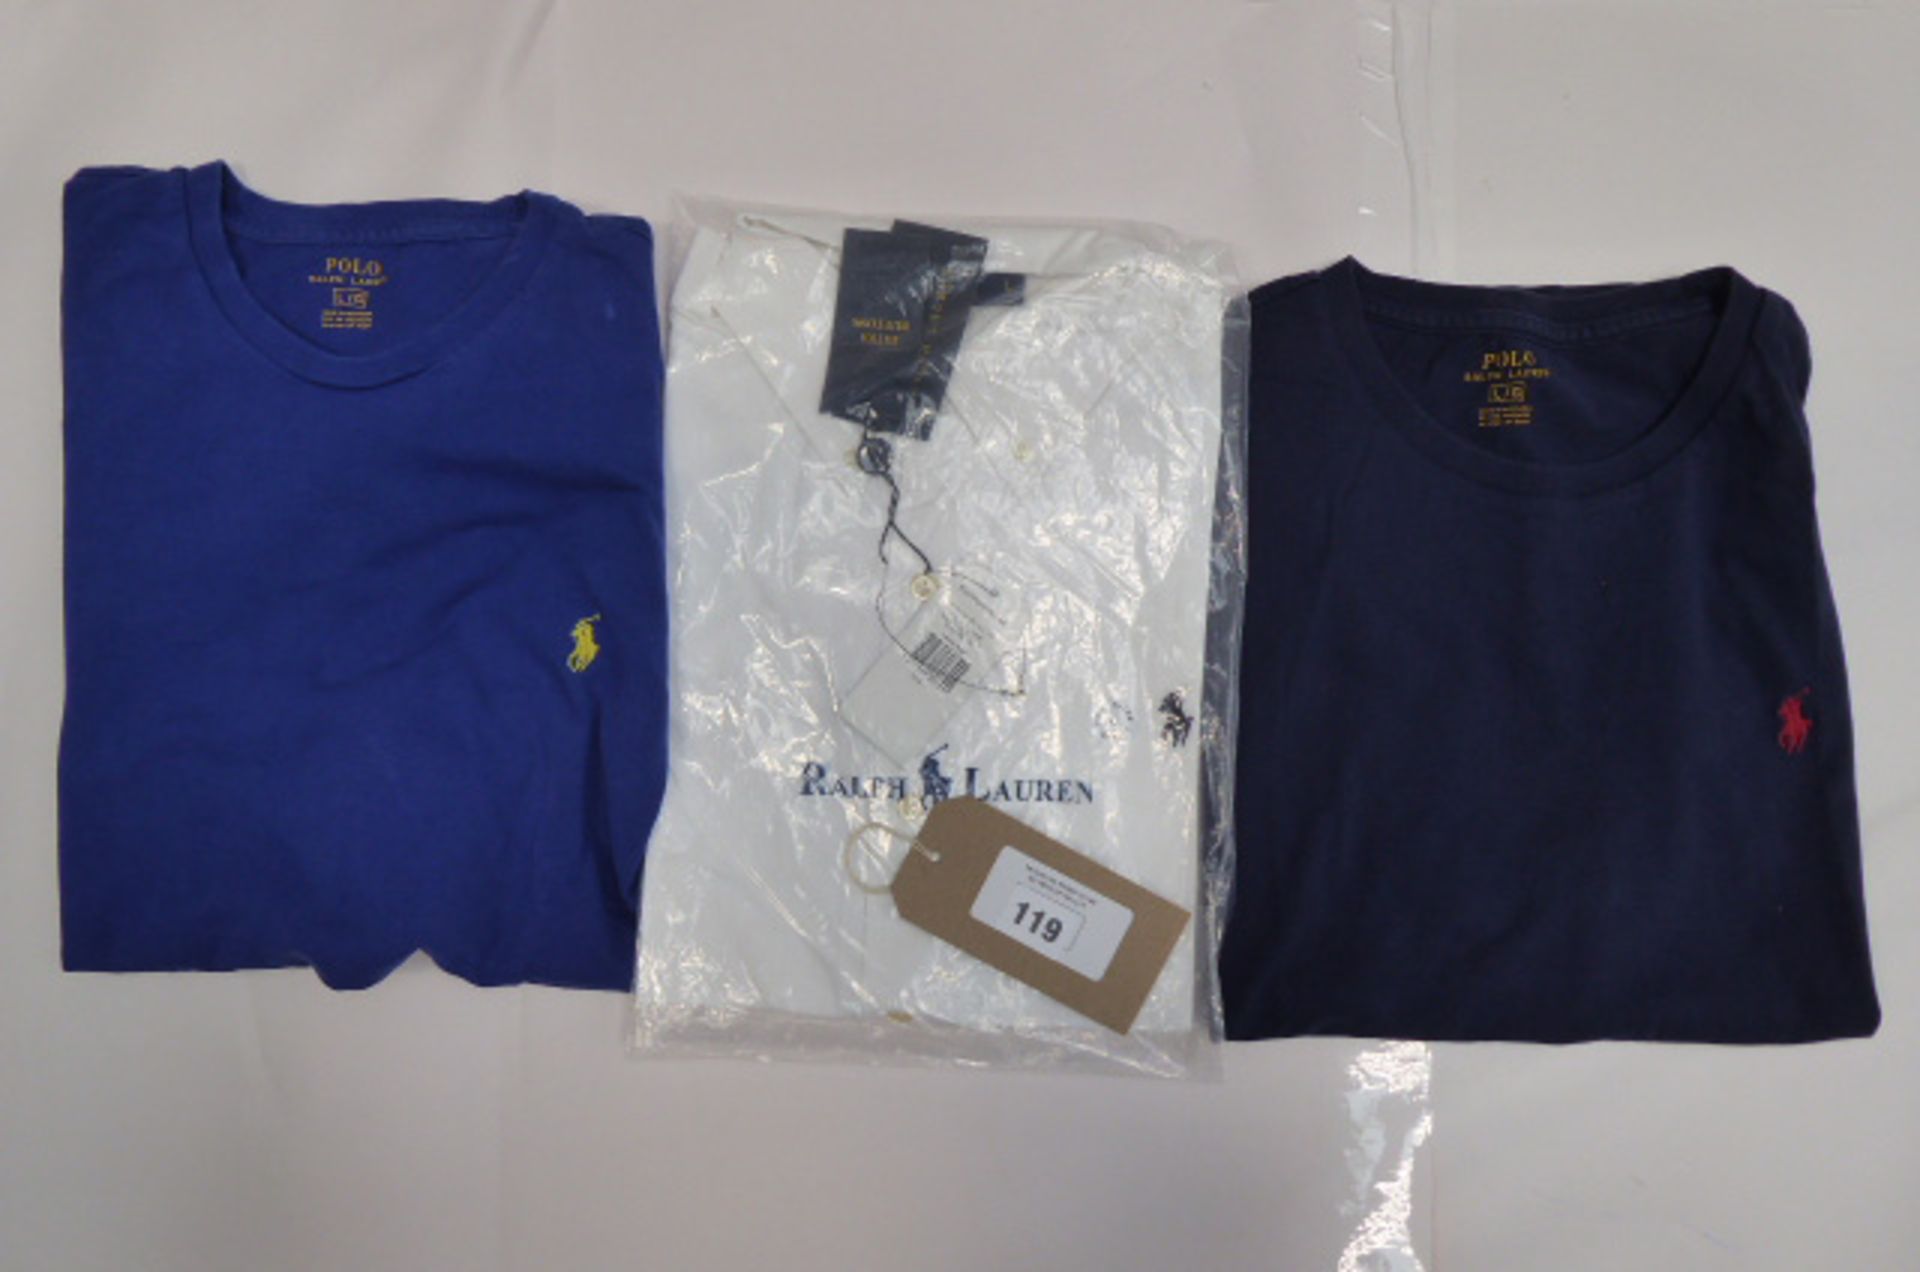 Polo Ralph Lauren white shirt size large and two blue PoloRalph Lauren t-shirts size large (used)